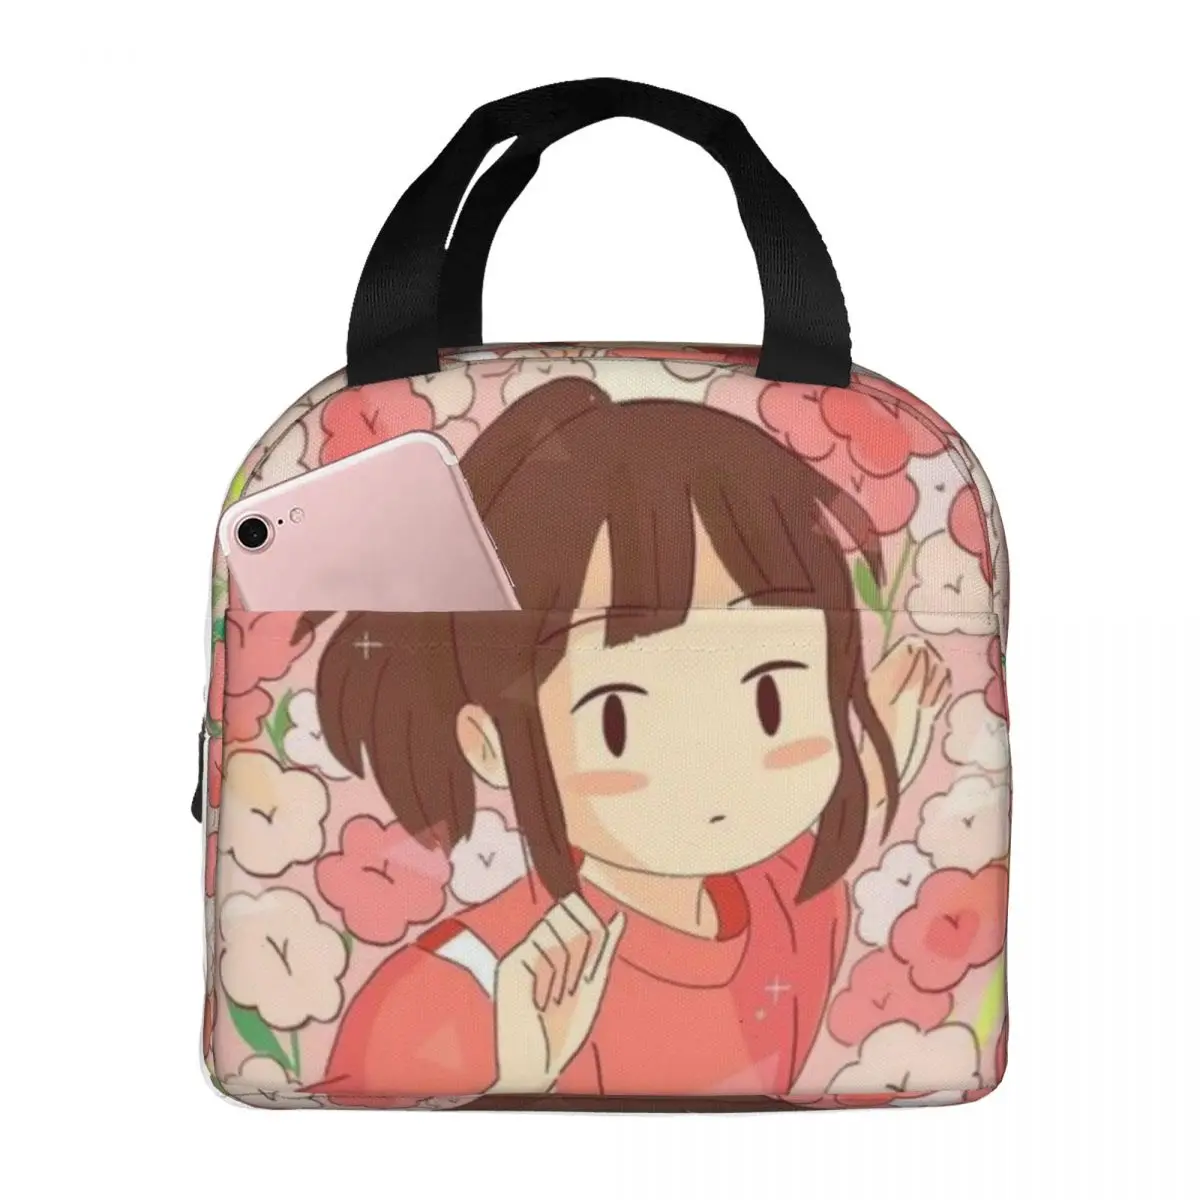 Spirited Away Lunch Bag Portable Insulated Oxford Cooler Anime Studio Ghibli Thermal Food School Lunch Box for Women Children